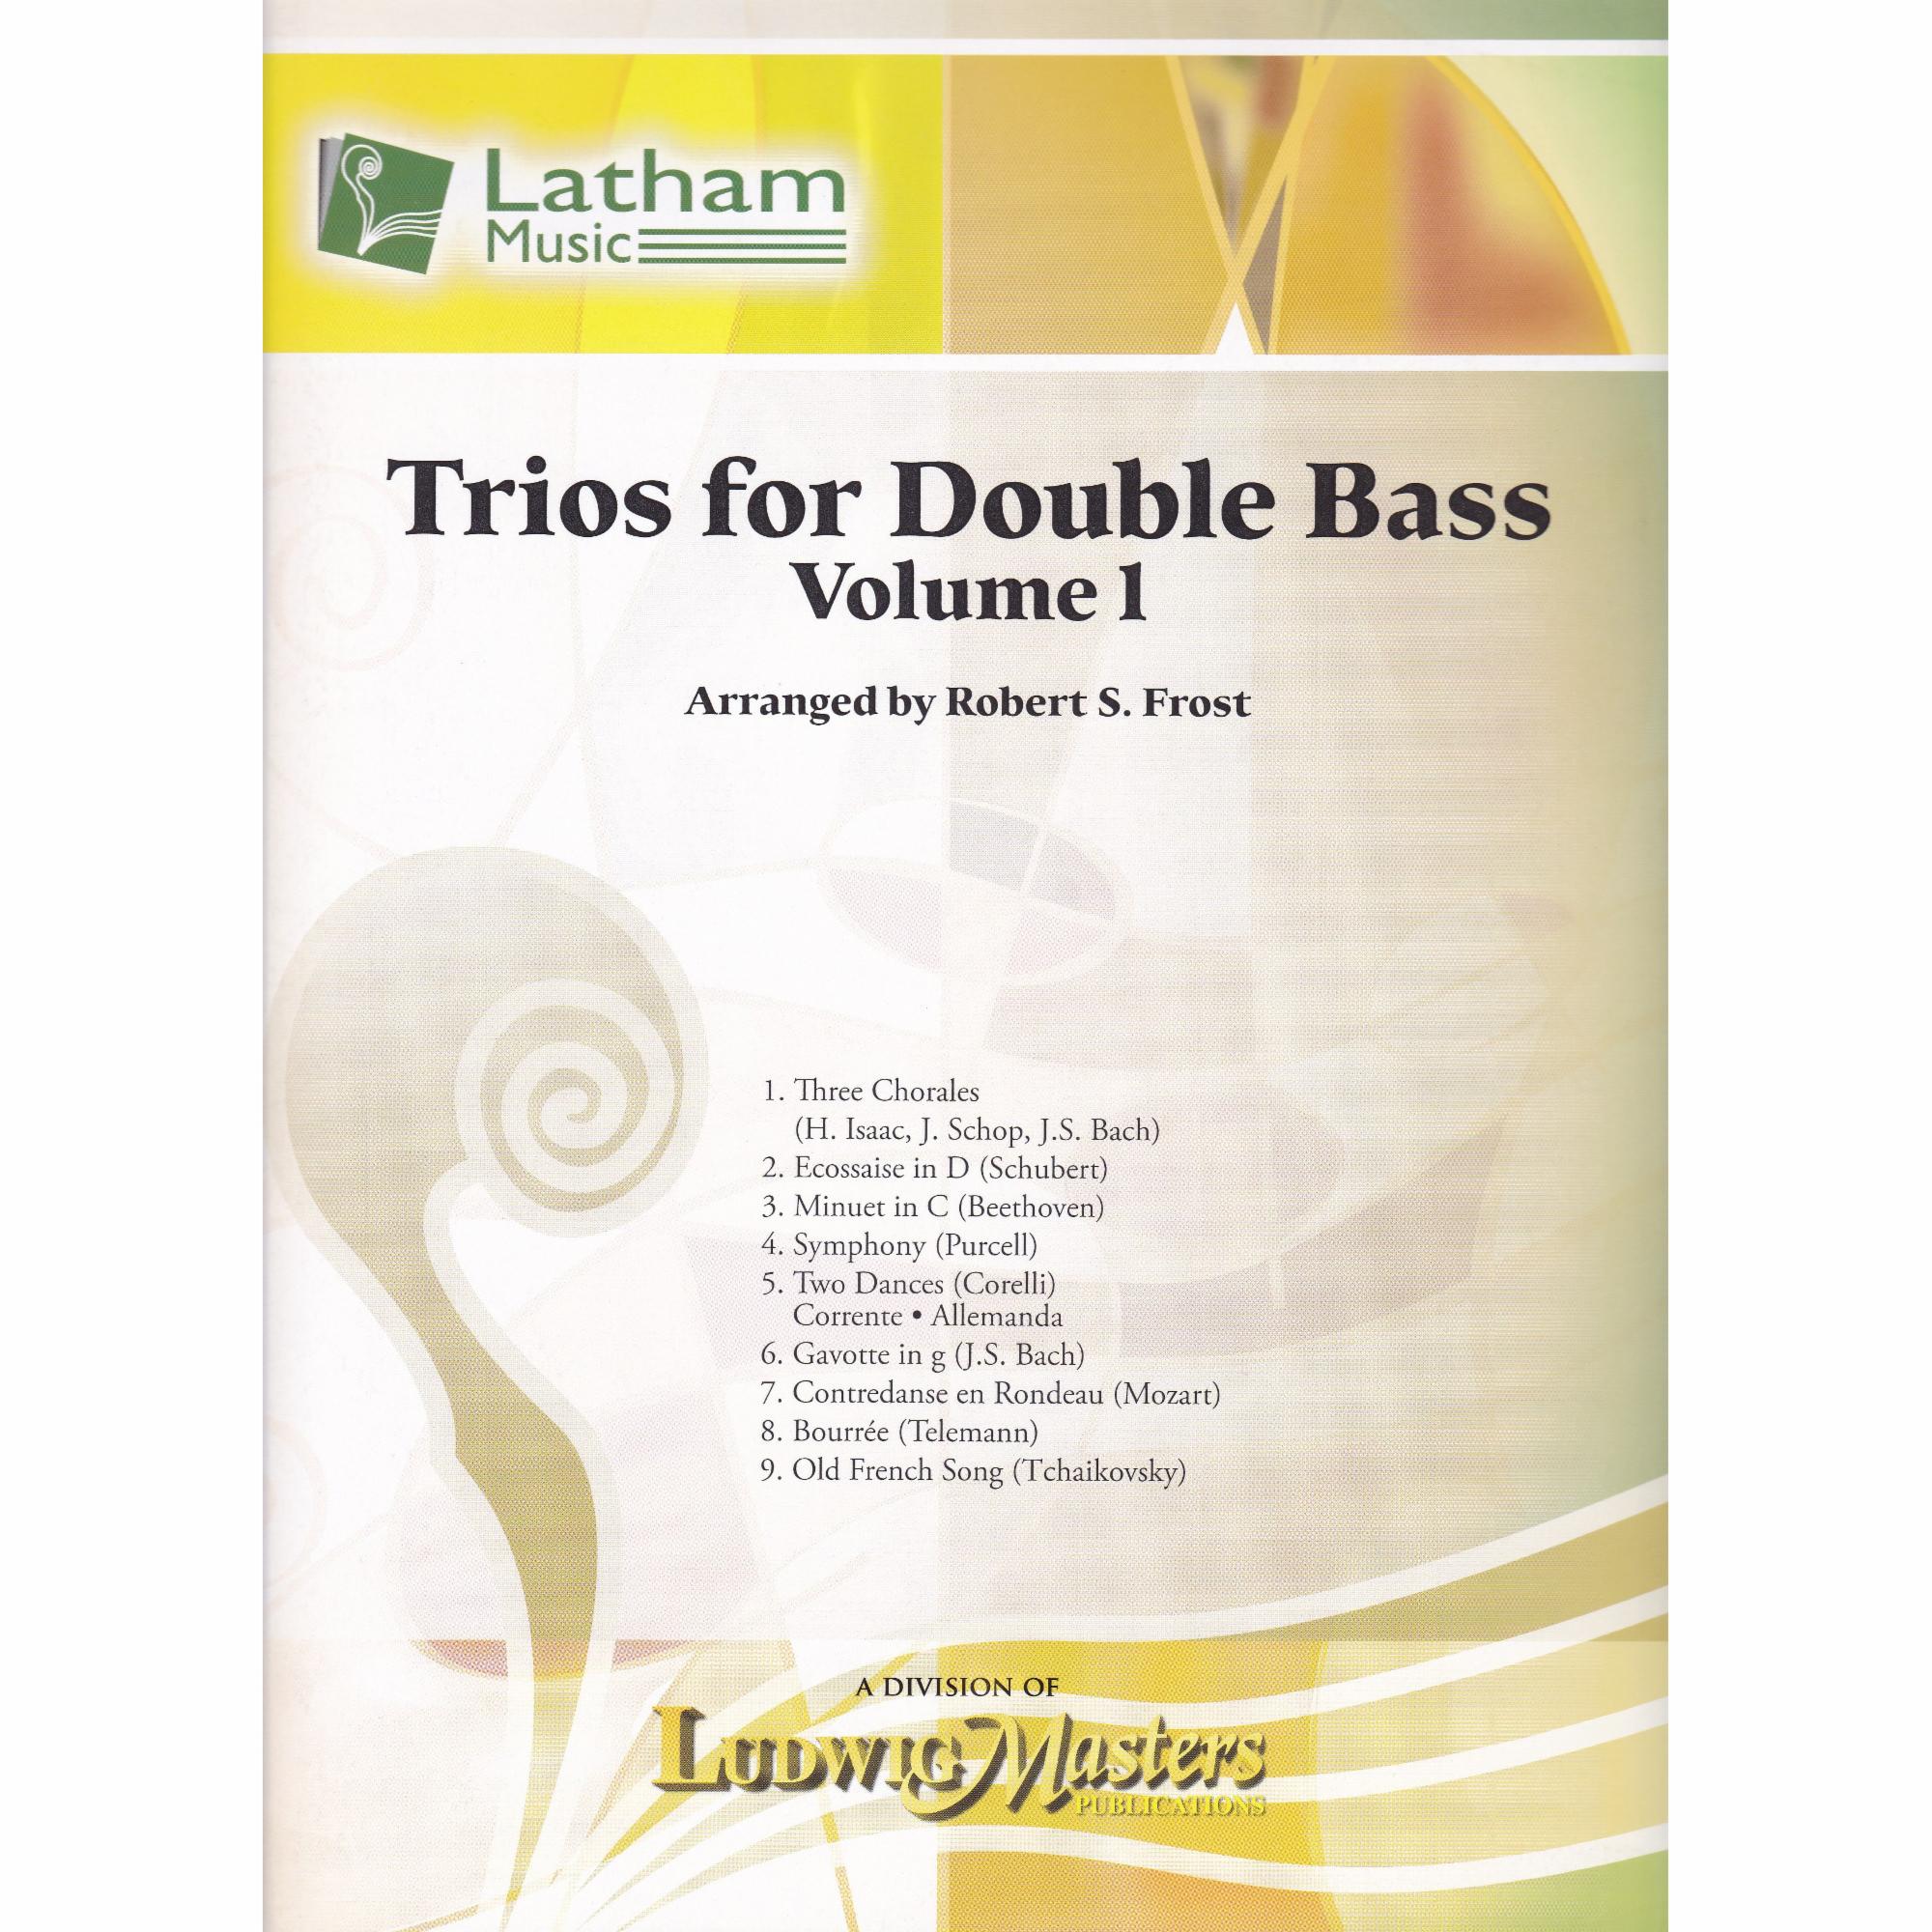 Trios for Double Bass